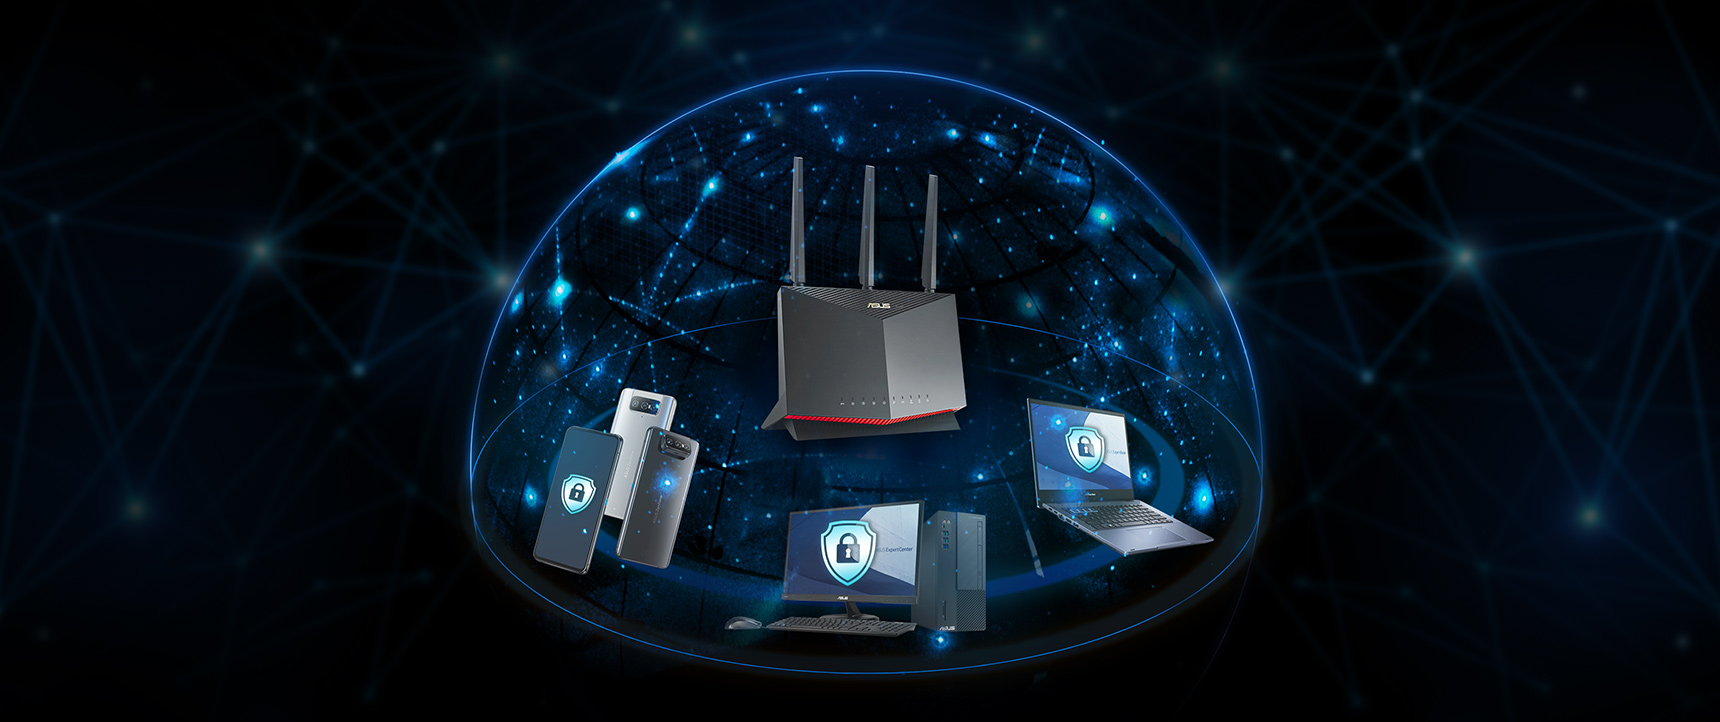 Most ASUS routers include AiProtection technology powered by Trend Micro™, which ensures that every device on your business network is protected